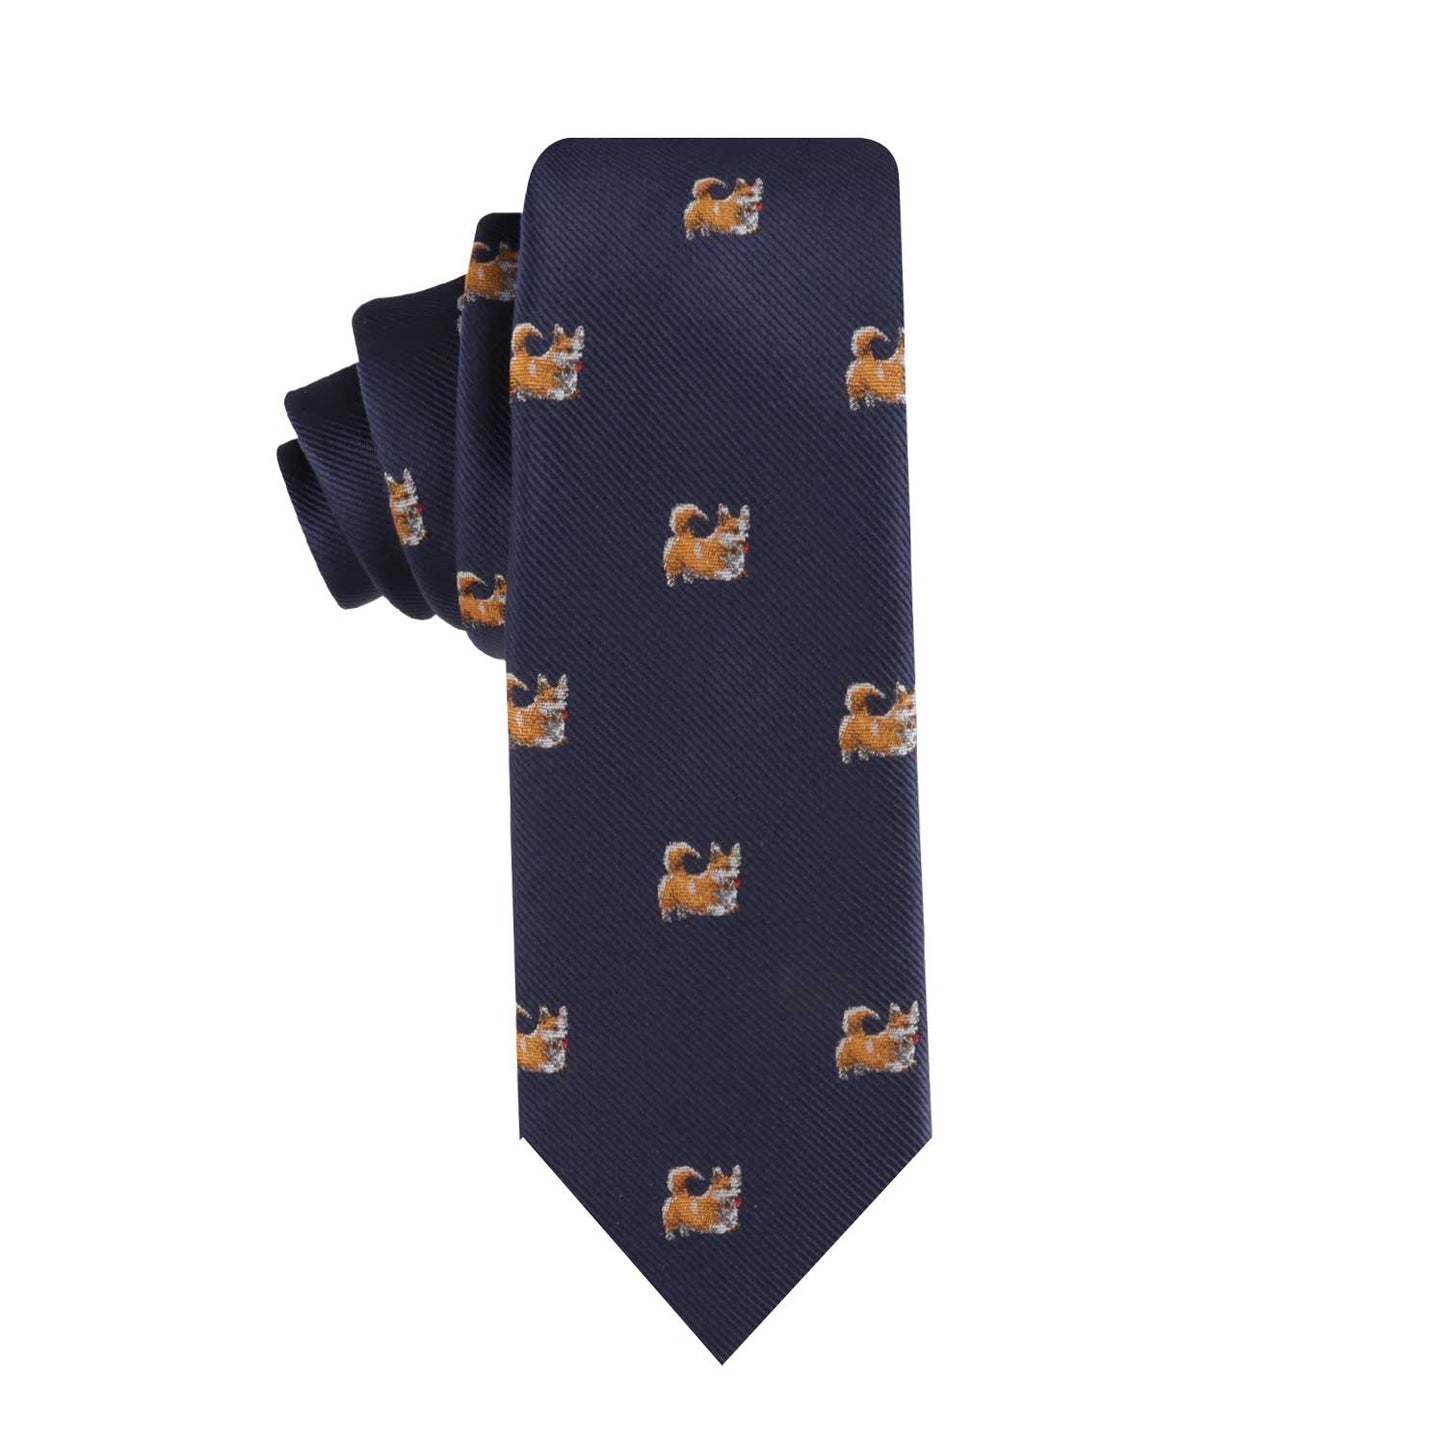 A Corgi Dog Skinny Tie, adding a touch of canine chic.